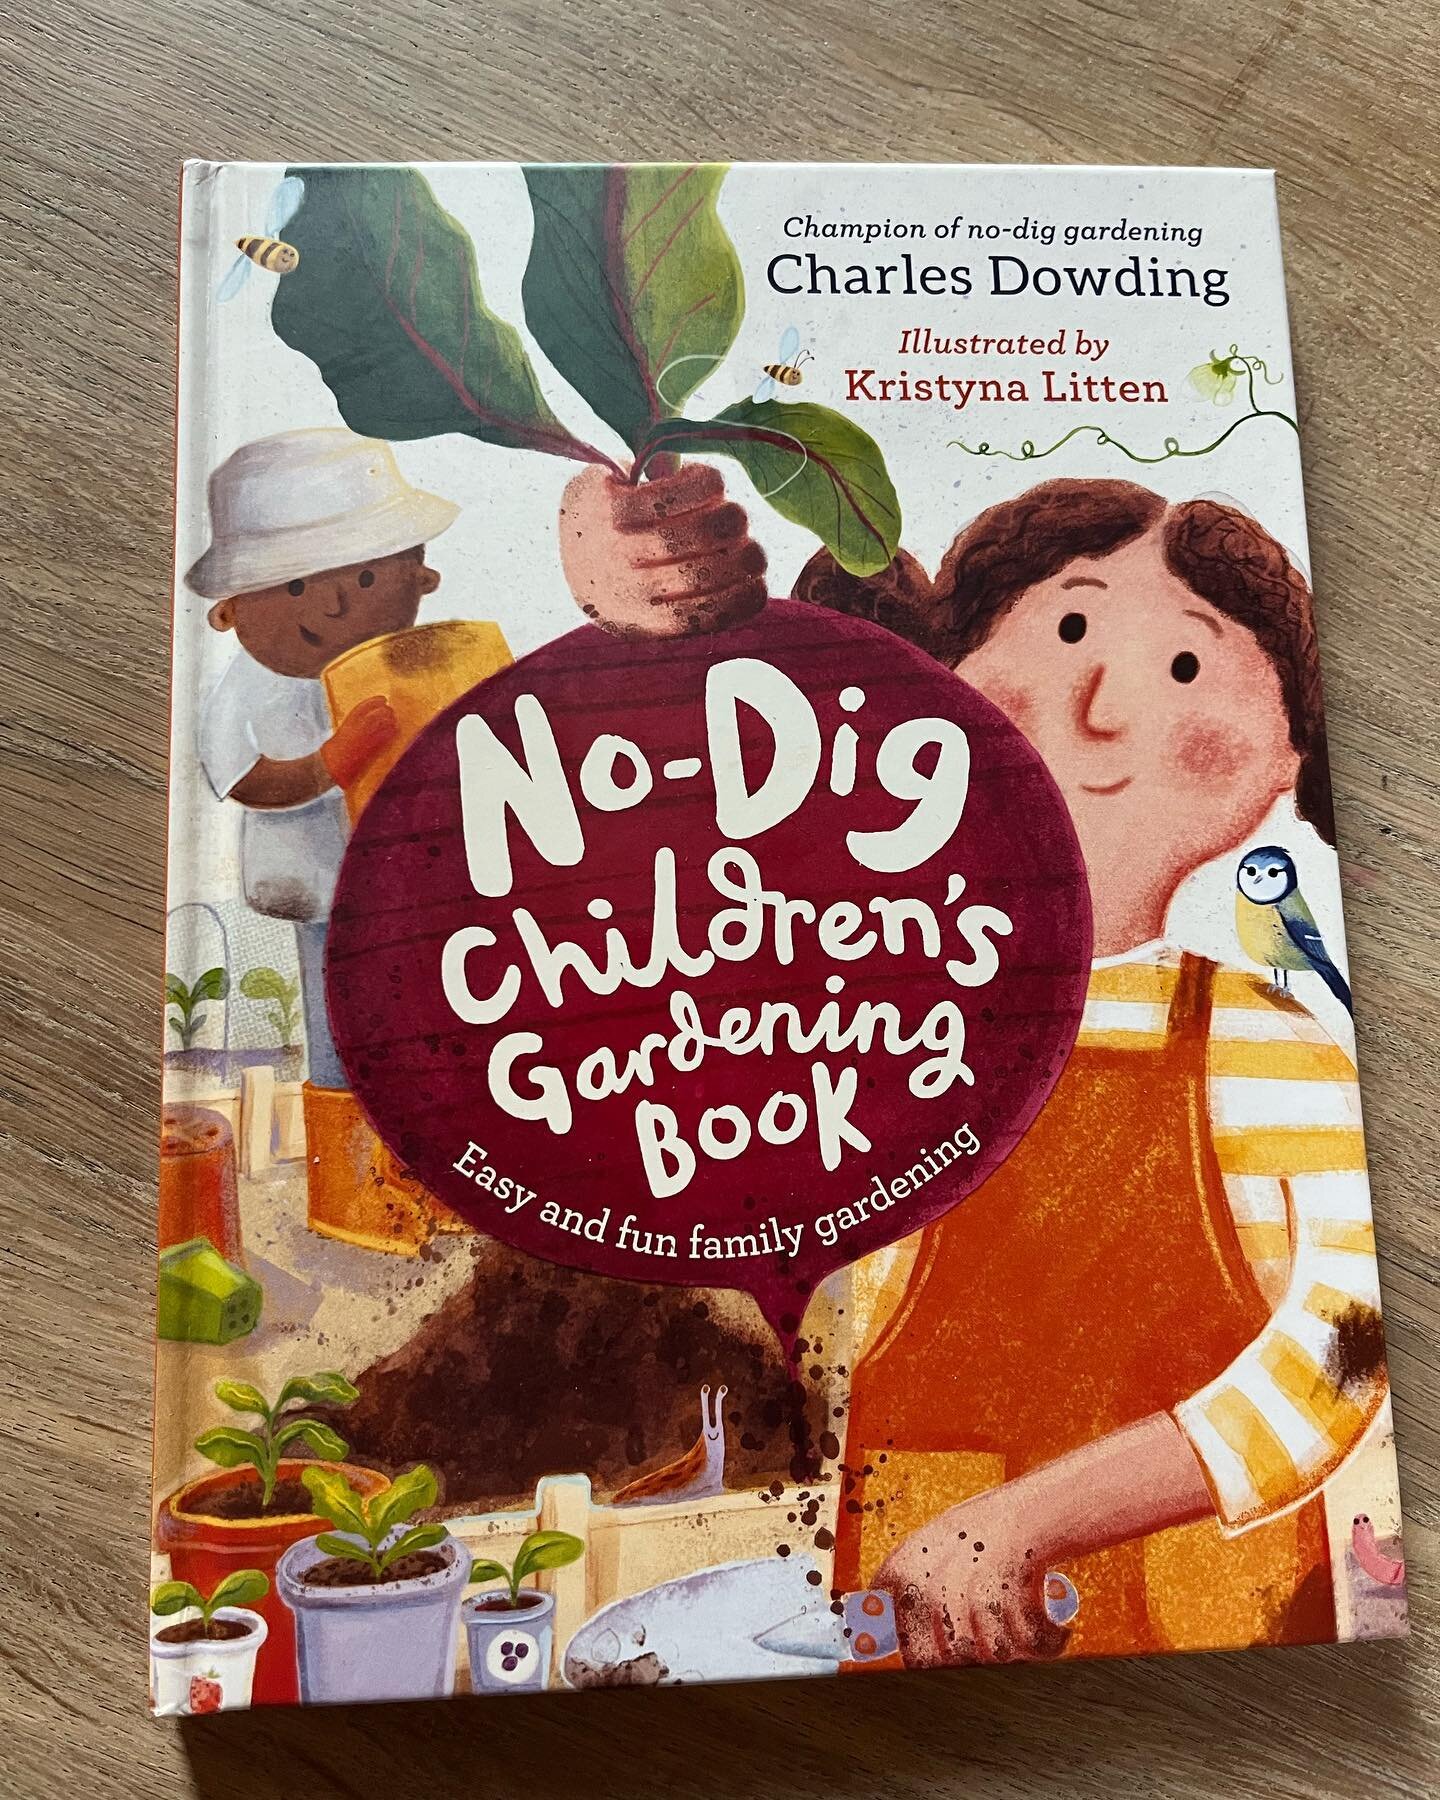 Charles Dowding&rsquo;s no dig children&rsquo;s book with illustrations by Kristyna Litten, thanks to Paul and Kristyna for the book and seeds given to Faye, let the planting begin!  #kristynalitten #nodig #charlesdowdingnodig #childrensbooks